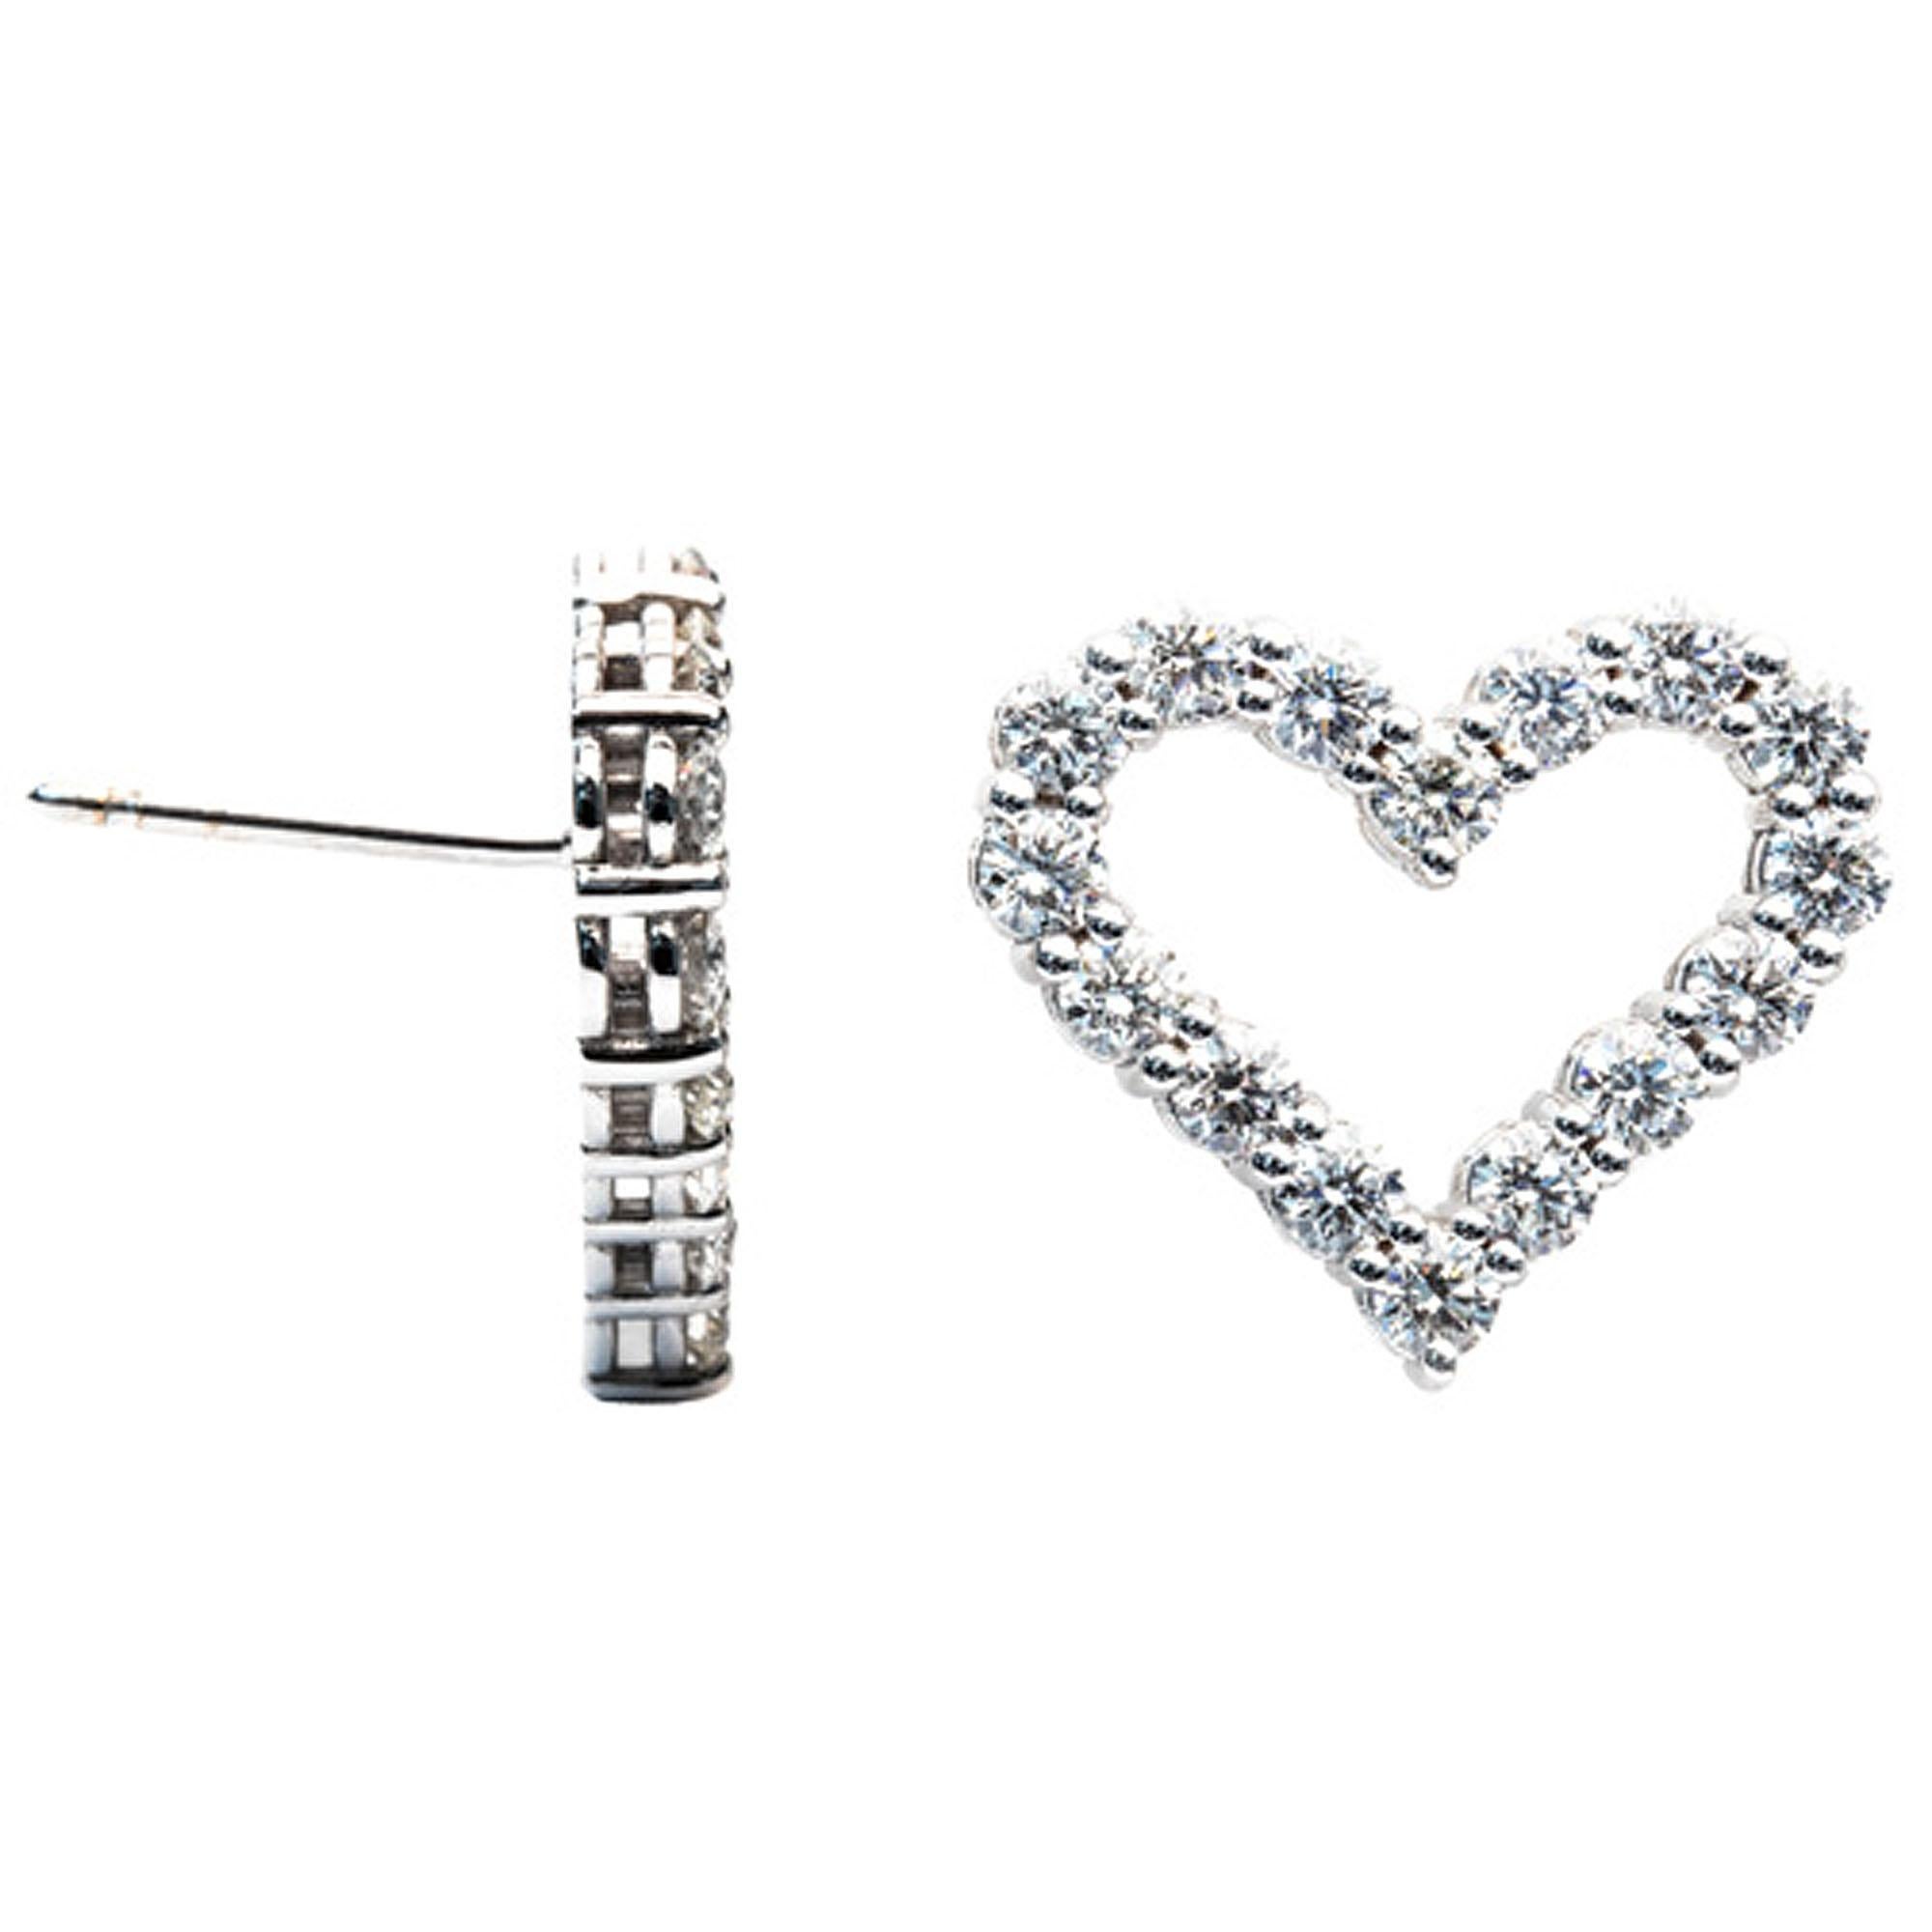 Elevate your elegance with these captivating 18K white gold earrings, each featuring a heart-shaped design meticulously crafted from an array of diamonds along the perimeter. The intricate detailing and thoughtful design create an open heart